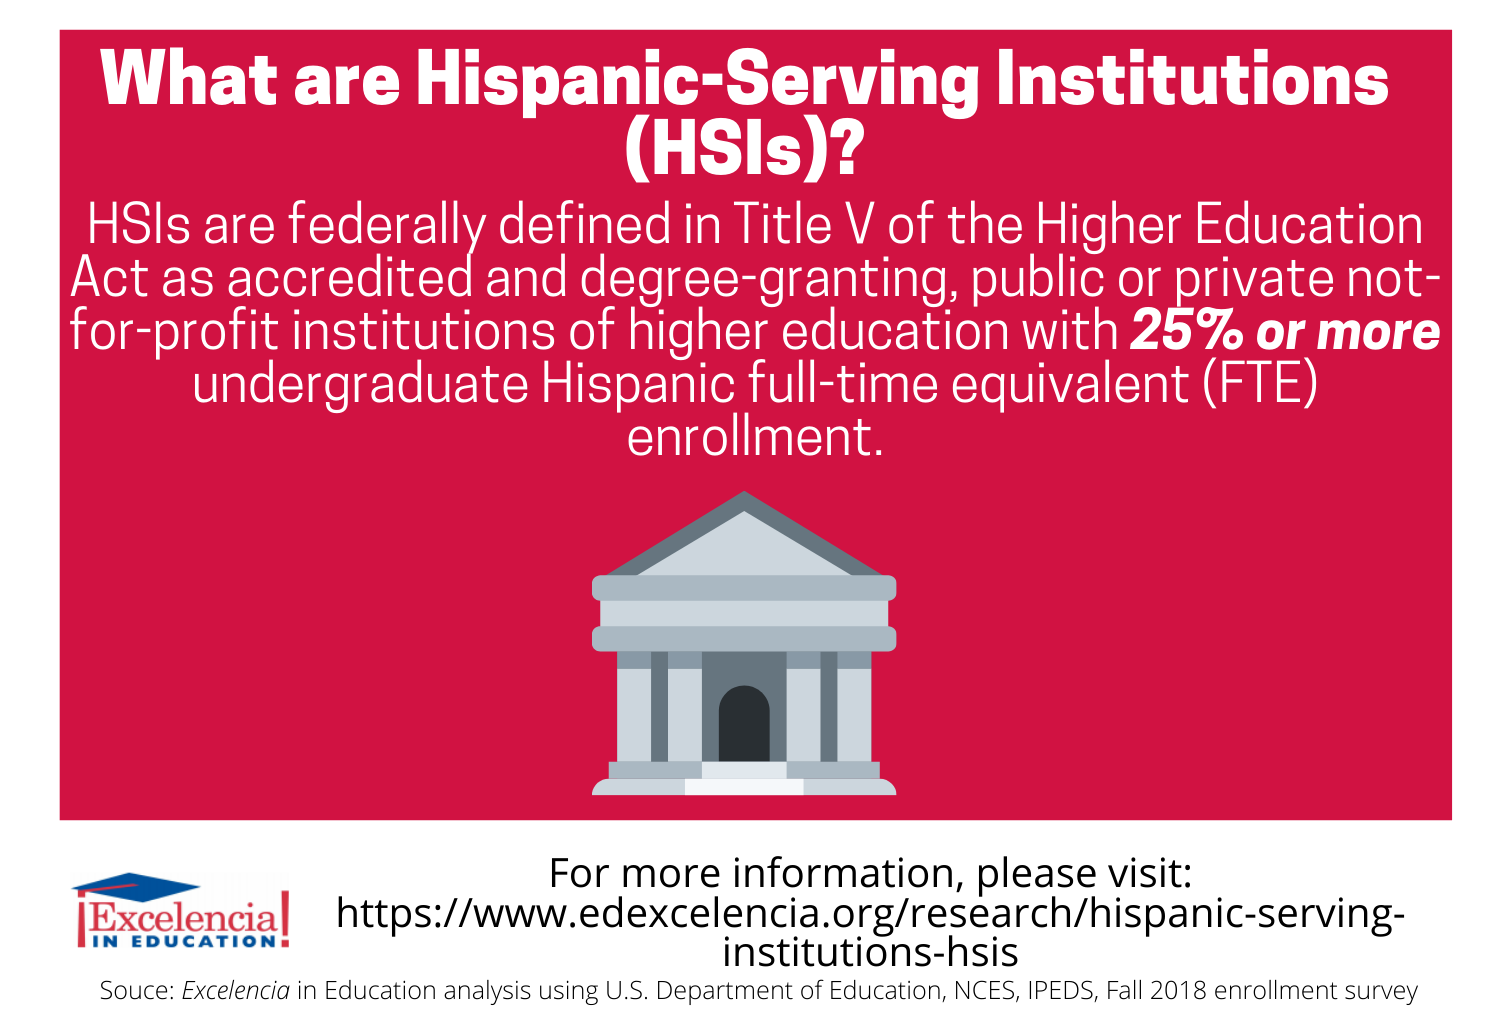 Infographic-What are Hispanic-Serving Institutions (HSIs)